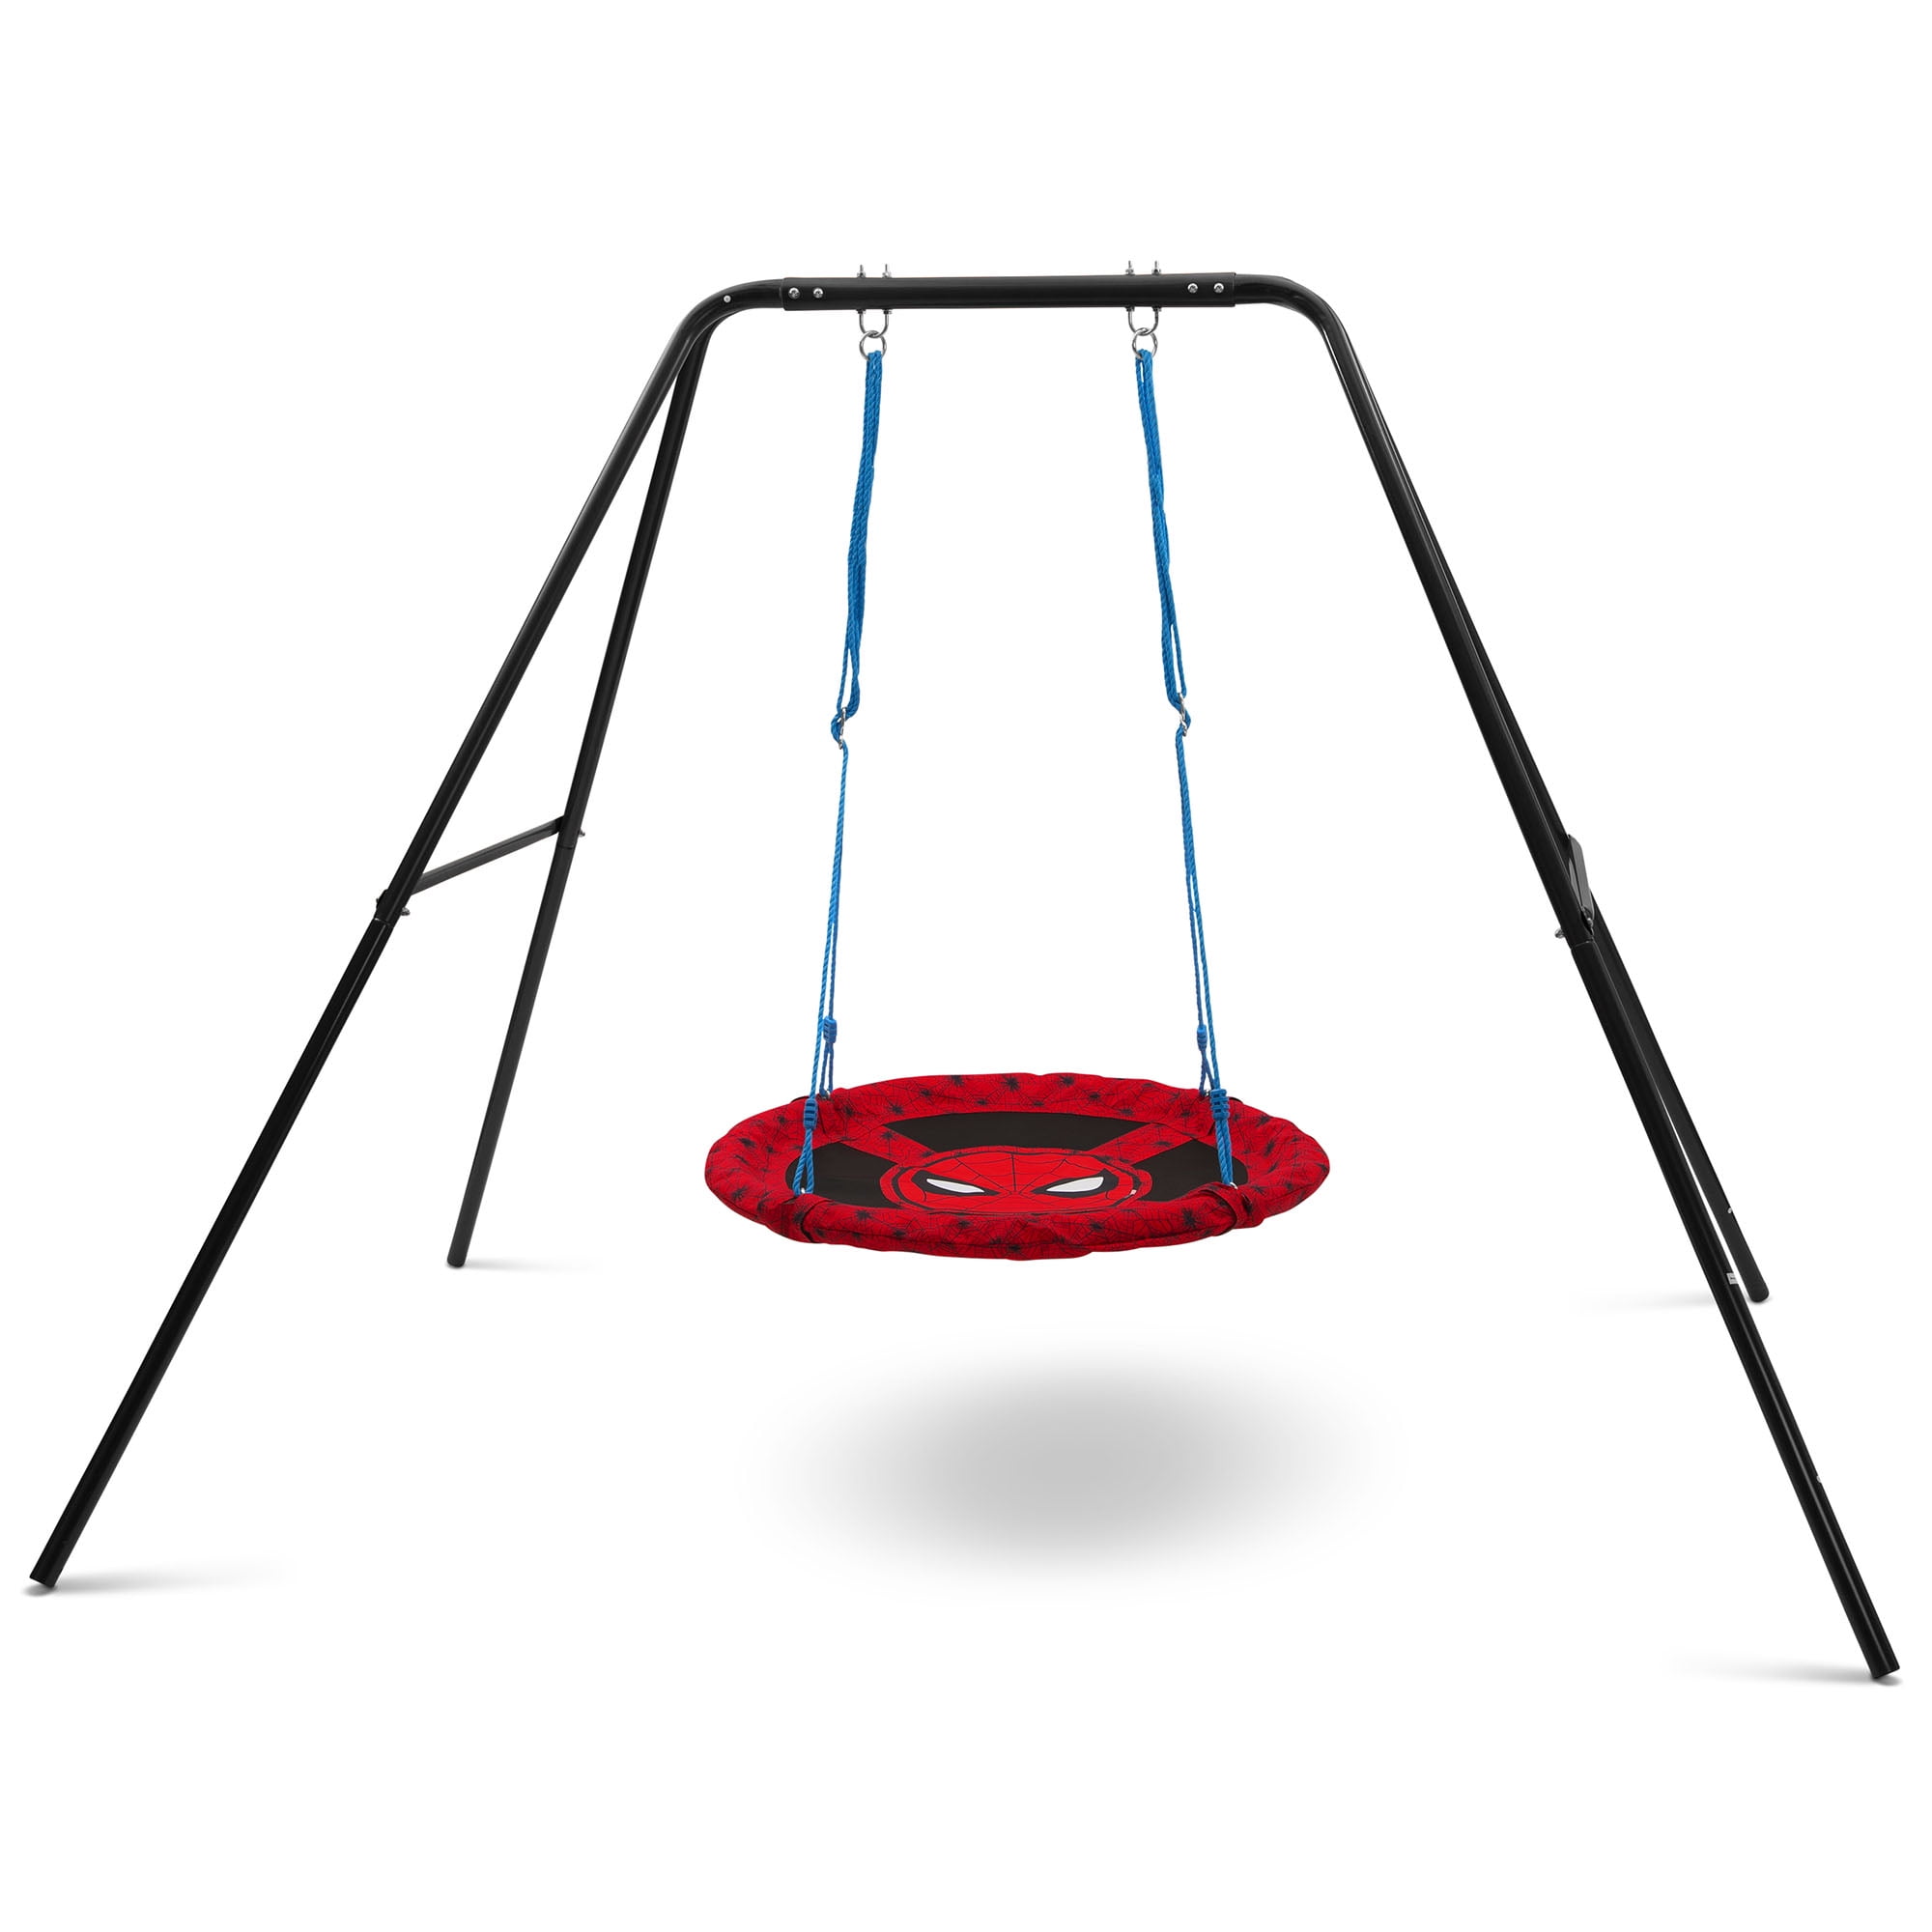 Marvel Spider-Man 40-inch Saucer Swing – Includes Hardware for Swing Set or  Tree Attachment 